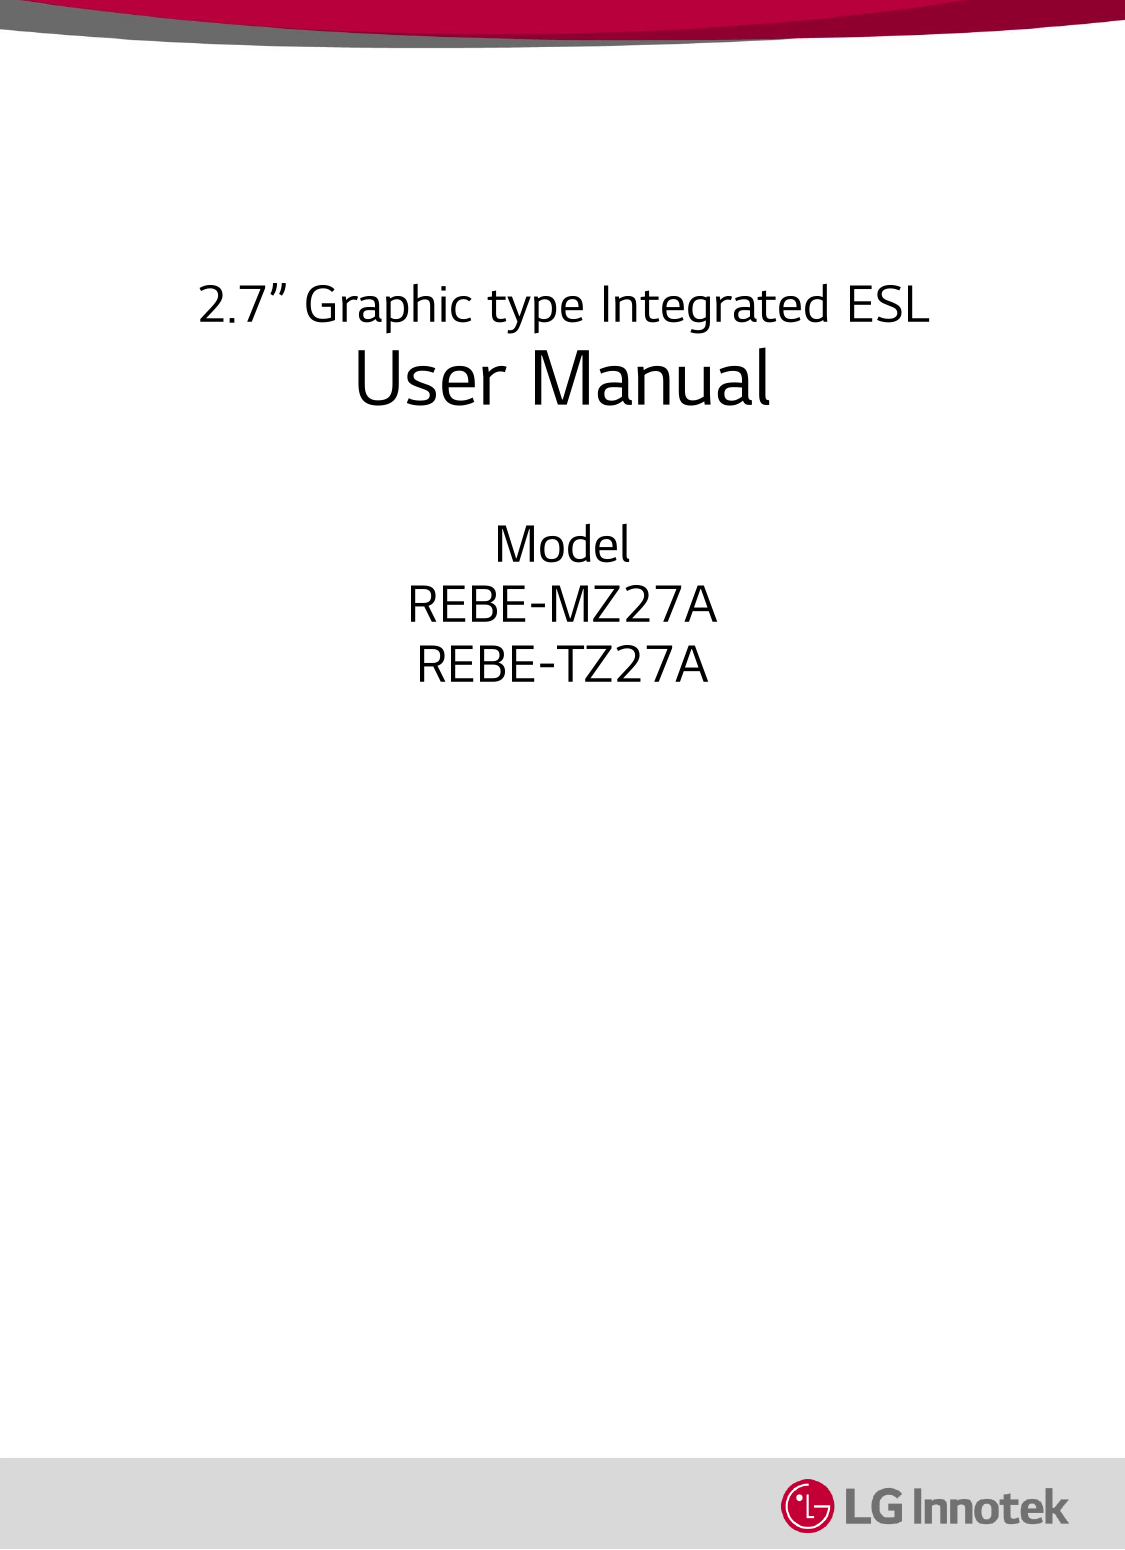 2.7” Graphic type Integrated ESL User Manual  Model REBE-MZ27A REBE-TZ27A 